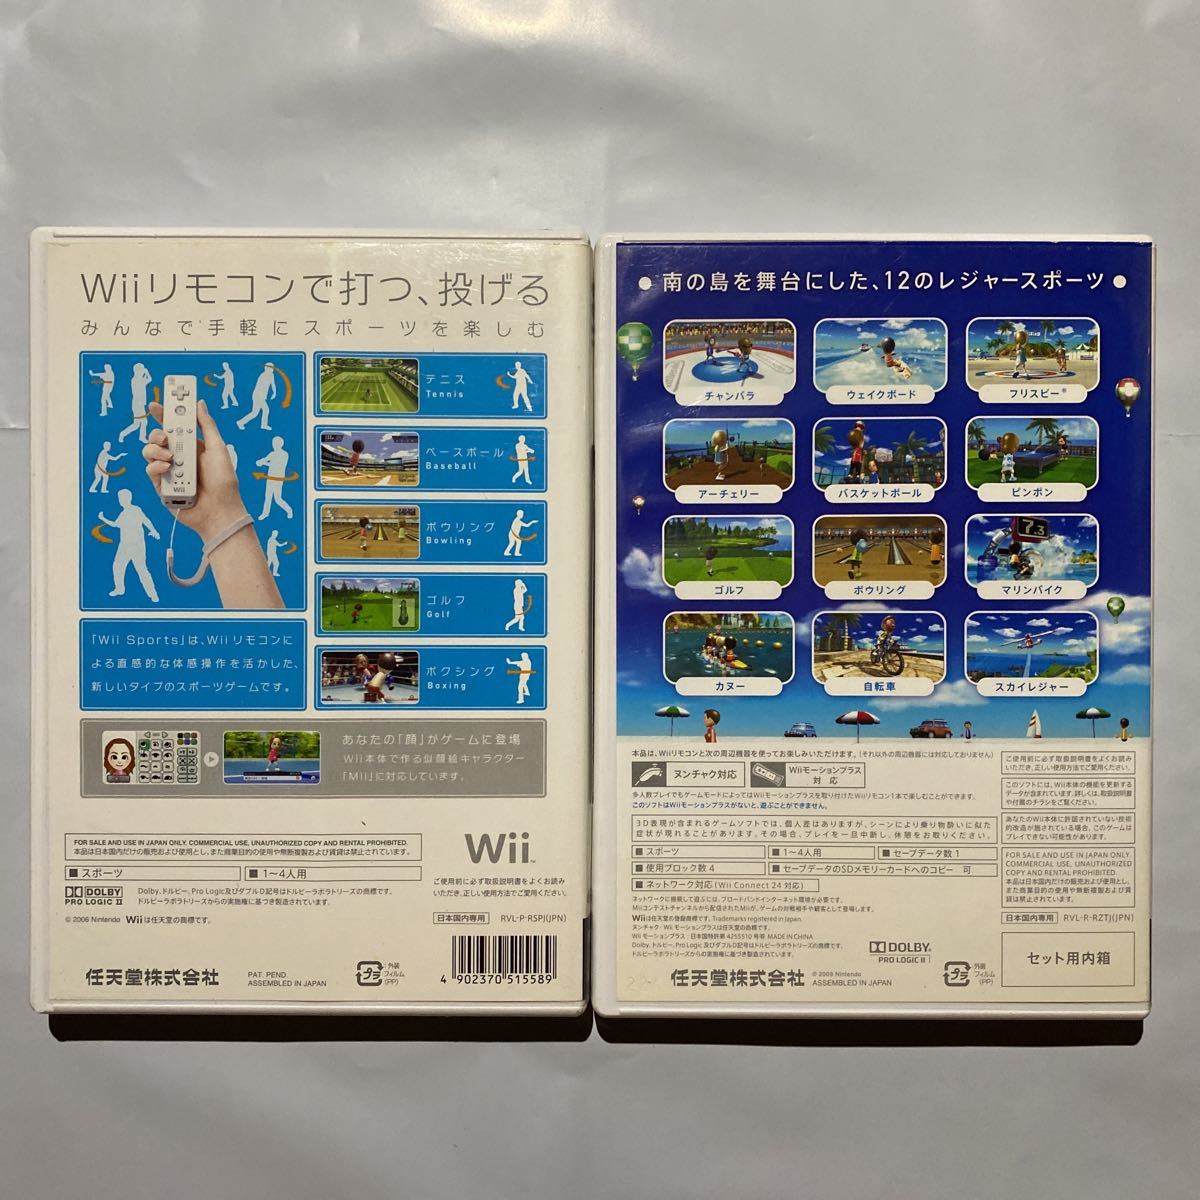 Wii Wii Sports スポーツ、リゾート　2本セット